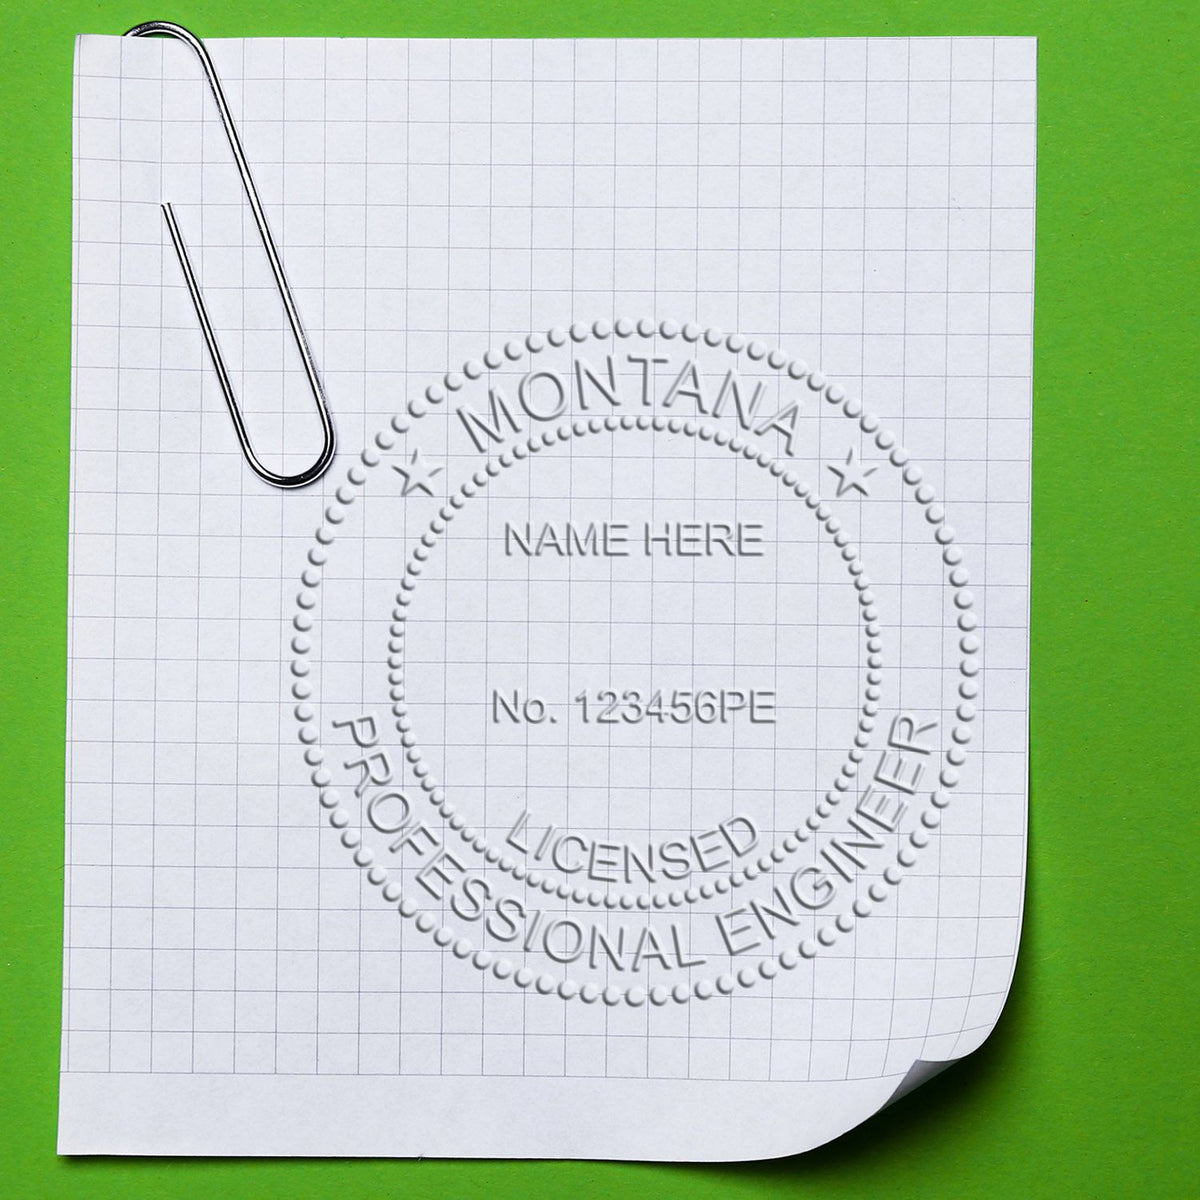 An alternative view of the State of Montana Extended Long Reach Engineer Seal stamped on a sheet of paper showing the image in use